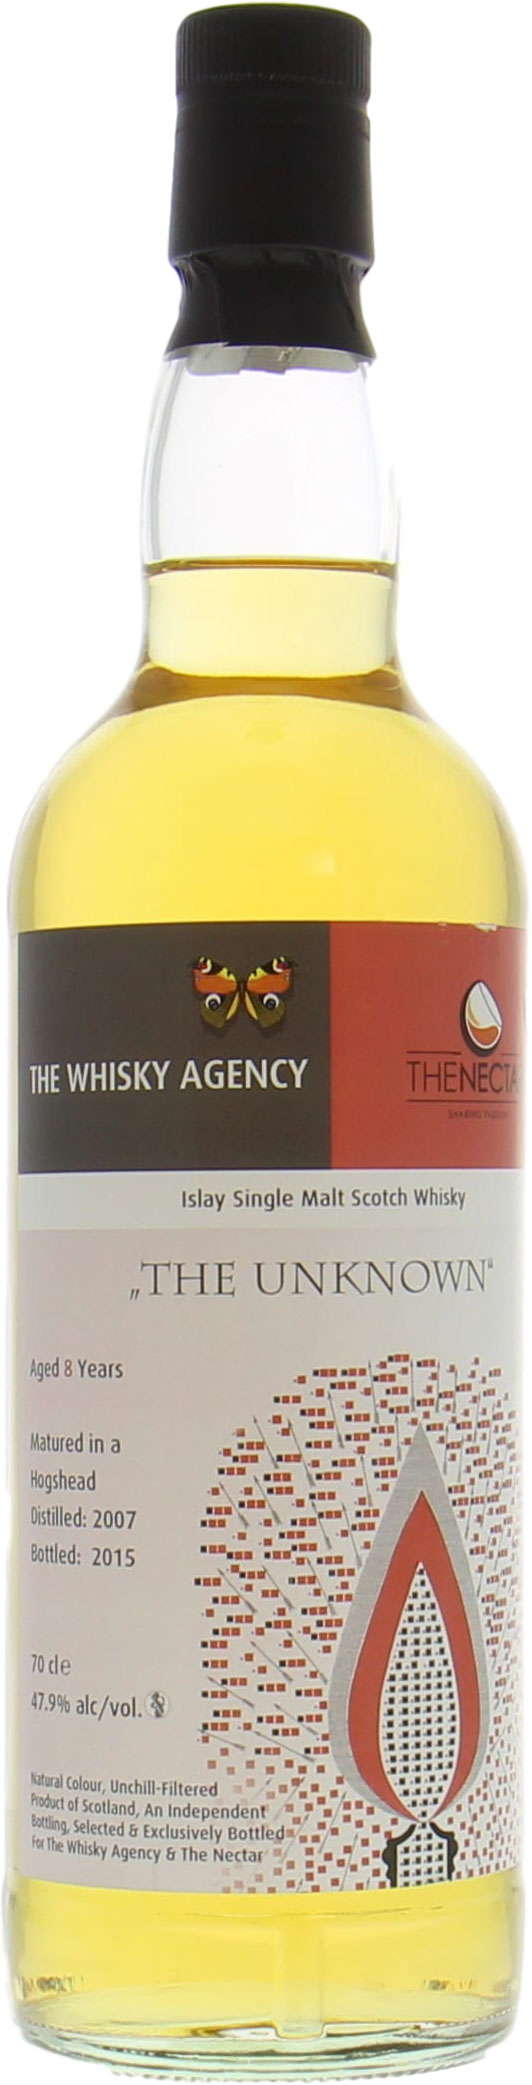 The Whisky Agency - 8 Years Old Islay The Unknown 47.9% 2007